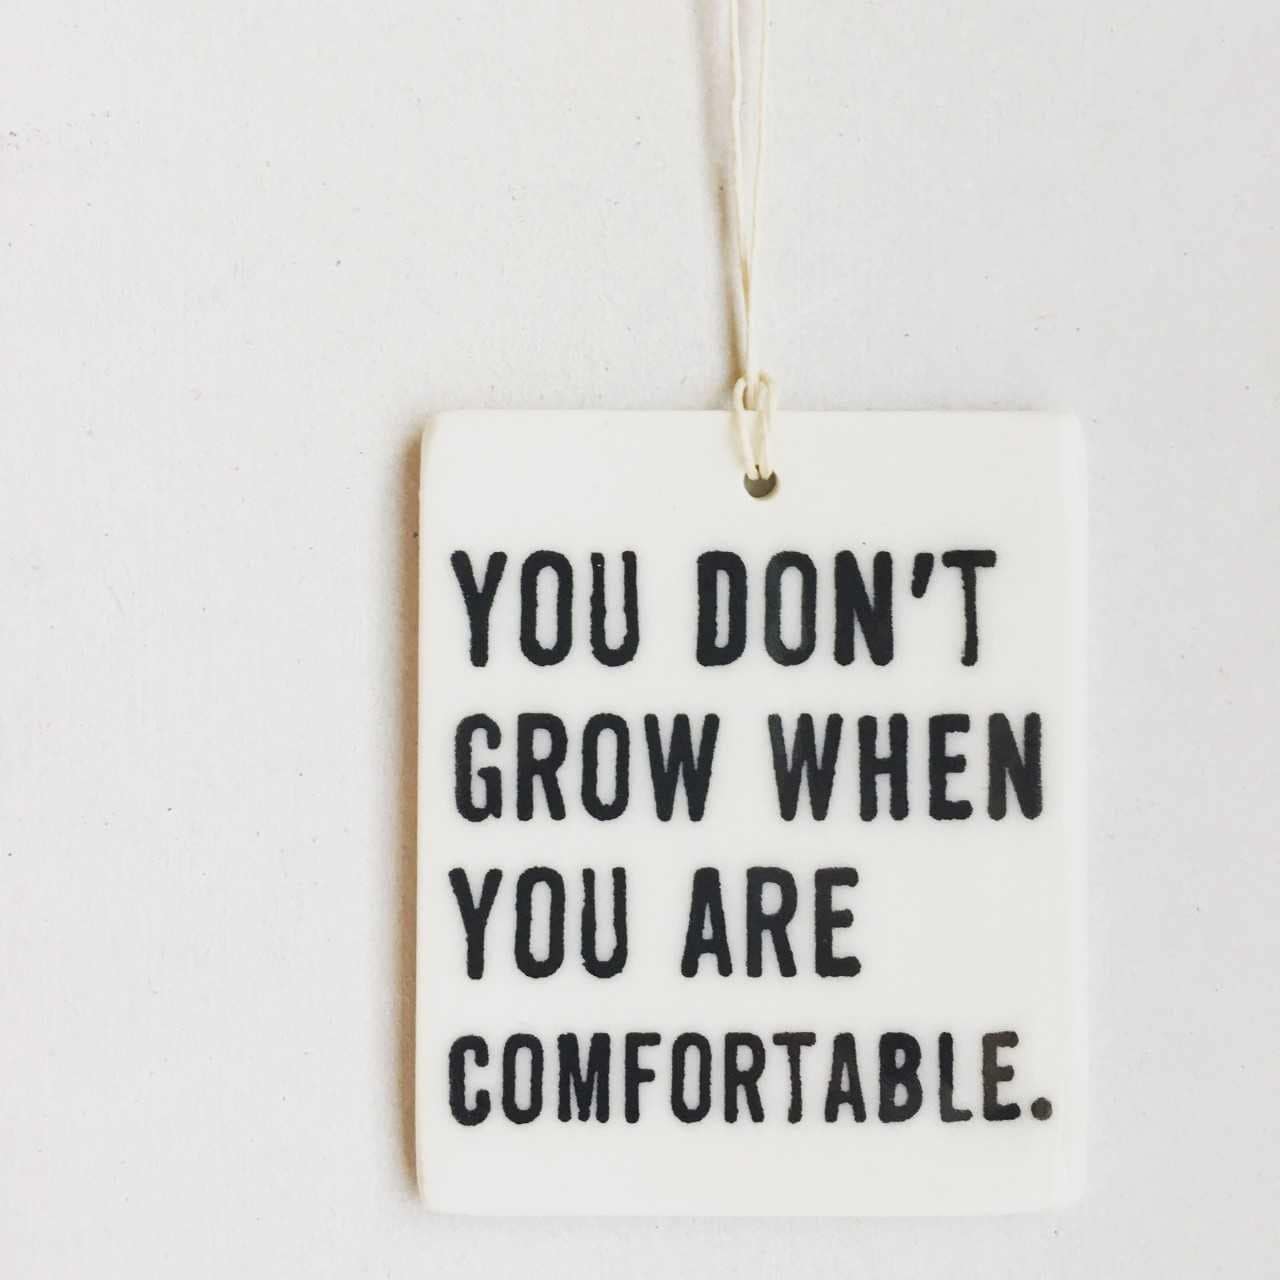 you don't grow when you are comfortable ceramic wall tag